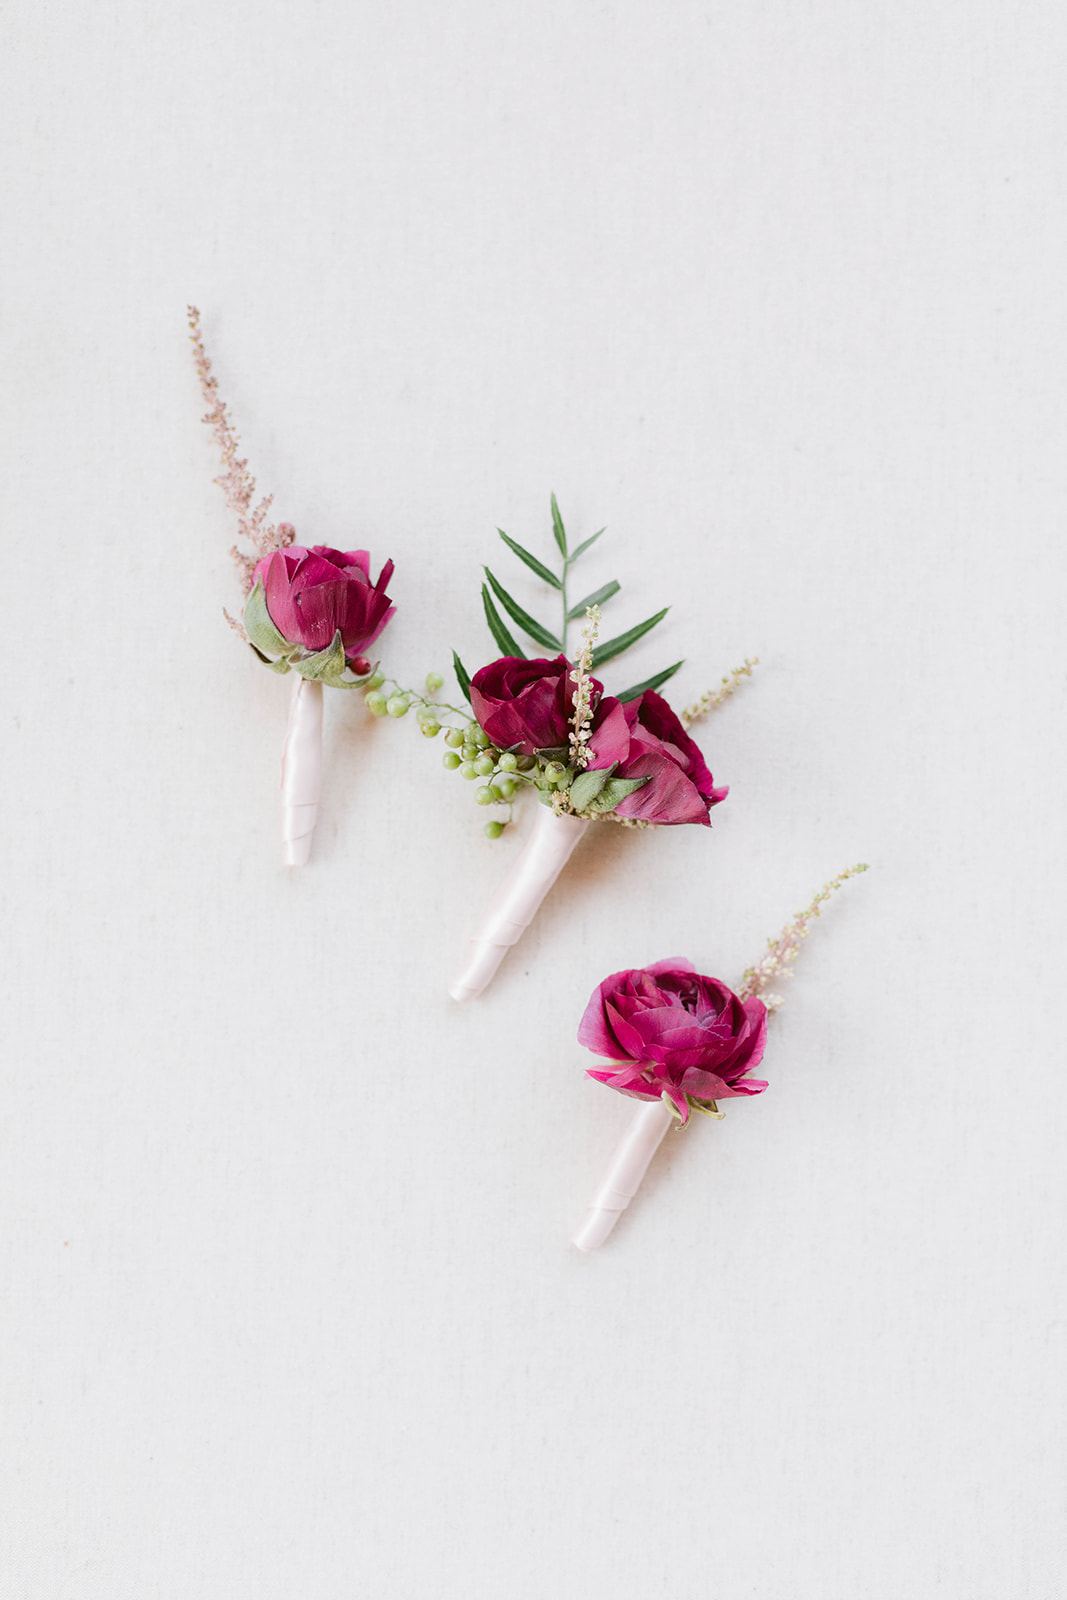 Boutonniere in burgundy rananculus with greenery shown wrapped in blush satin ribbon